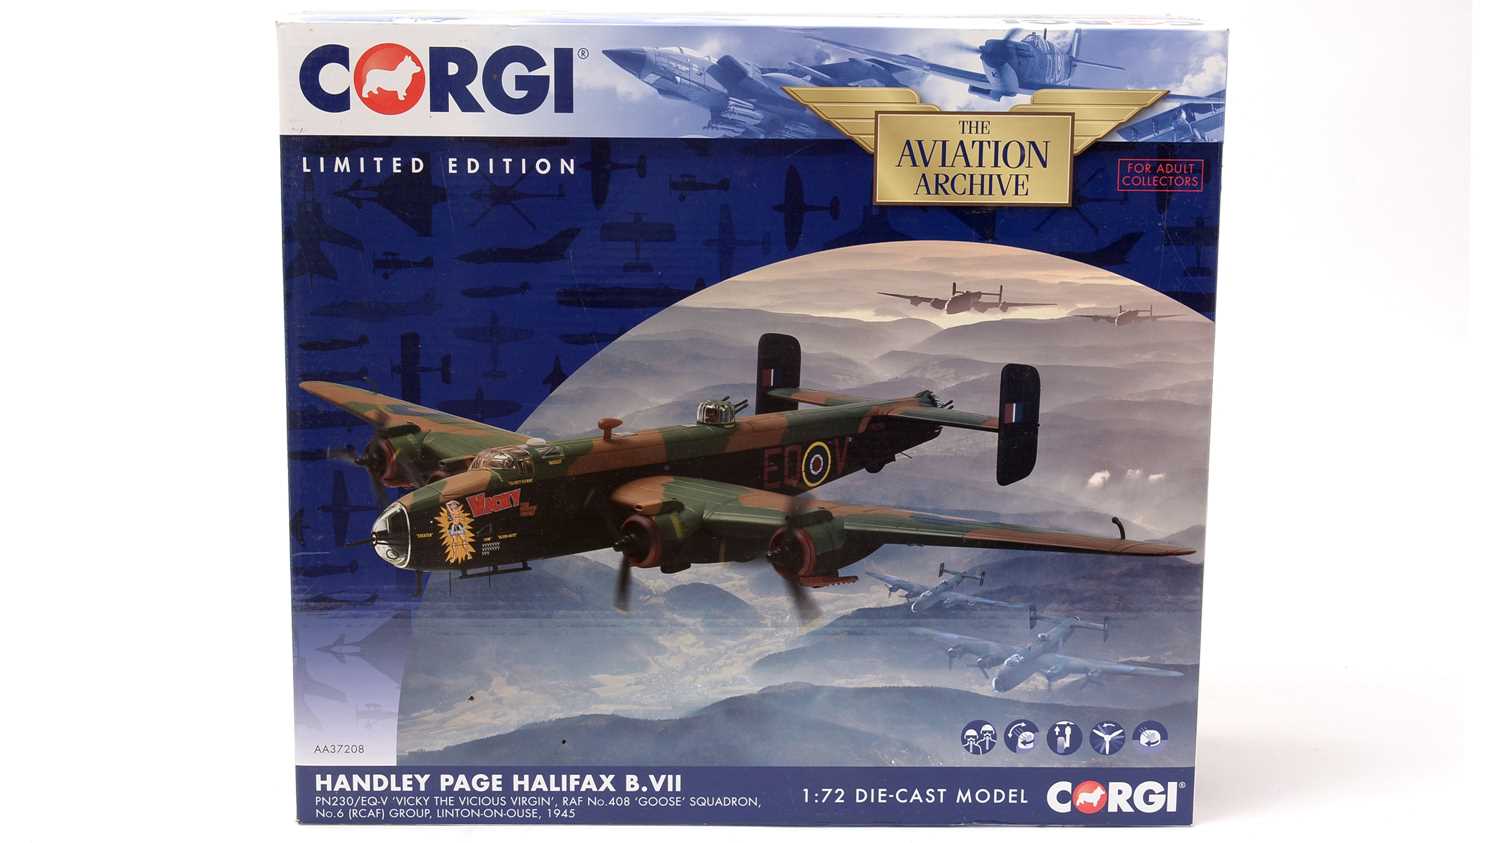 Lot 6 - Corgi Aviation Archive limited edition 1.72 die-cast scale model Handley Page Halifax B.VII